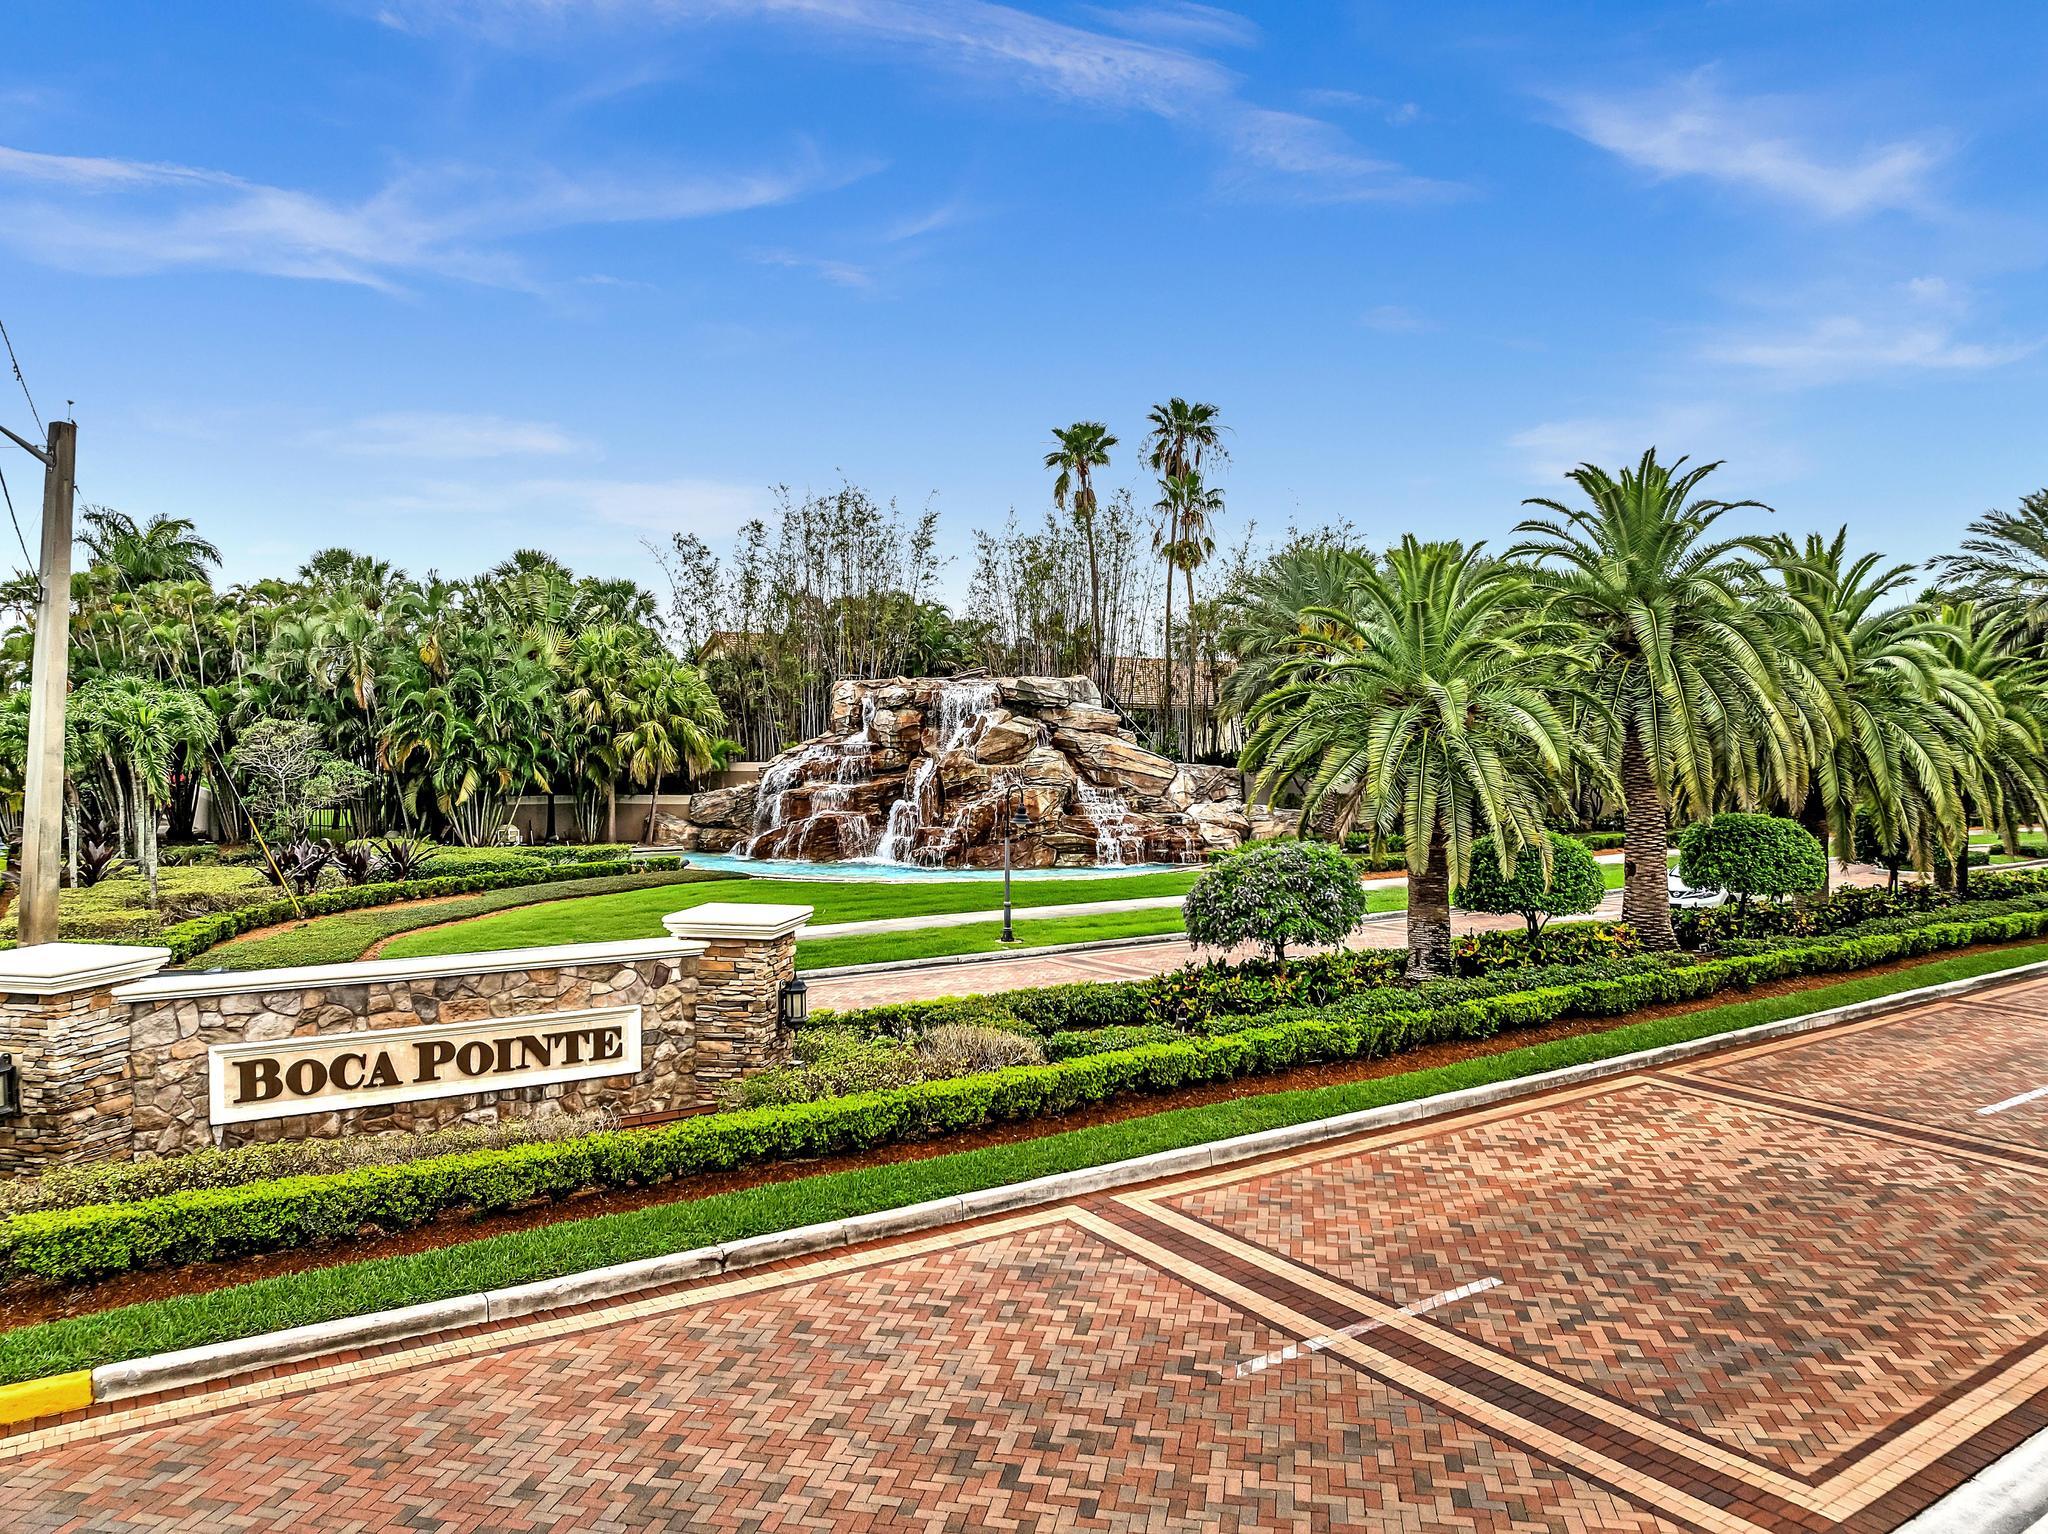 a view of a park with plants and palm trees